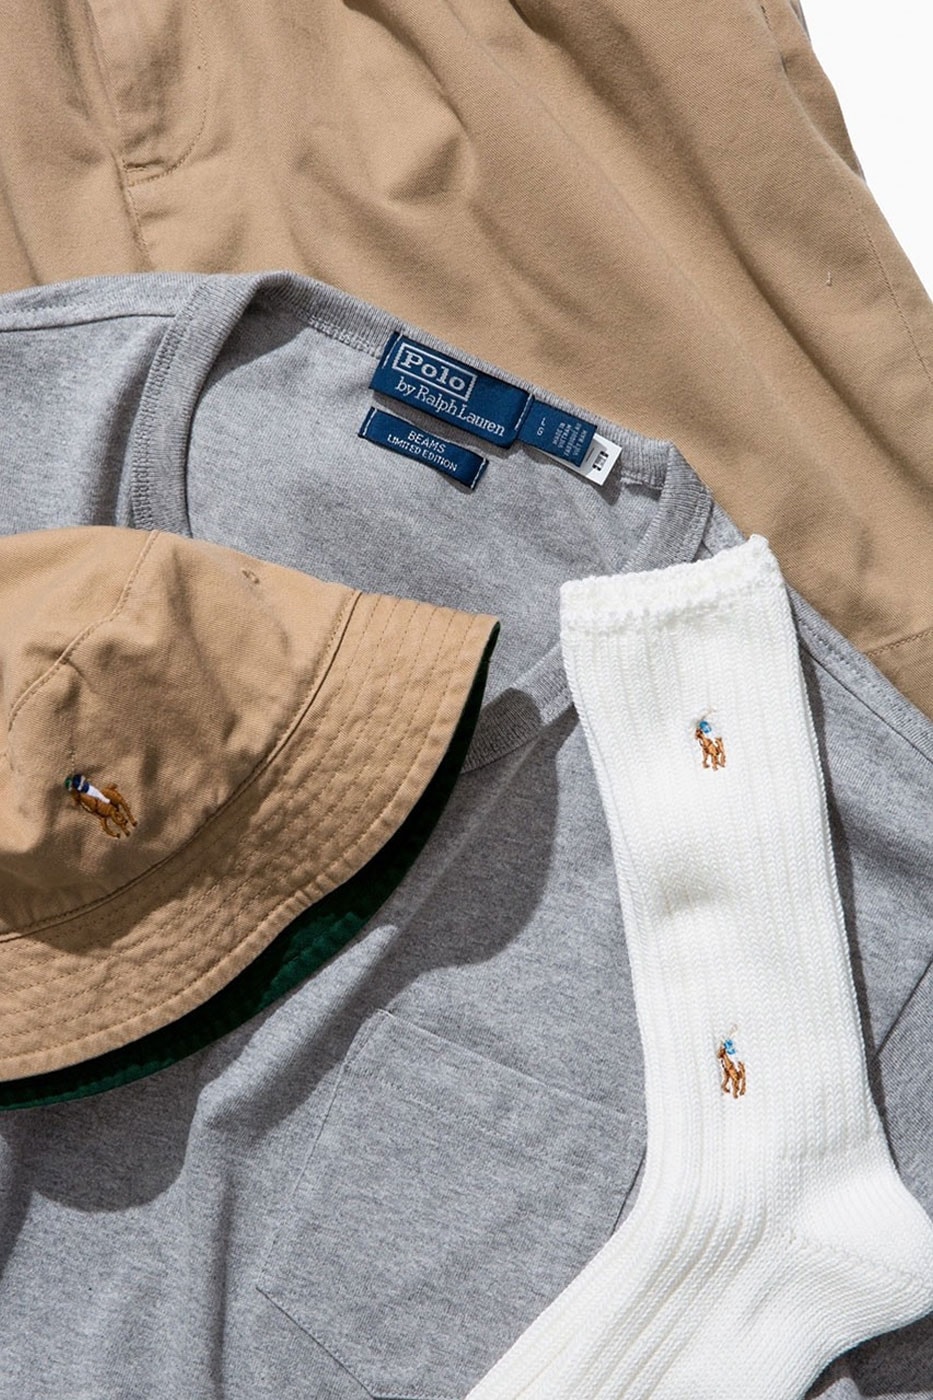 5 Iconic Ralph Lauren Items That Changed the Game